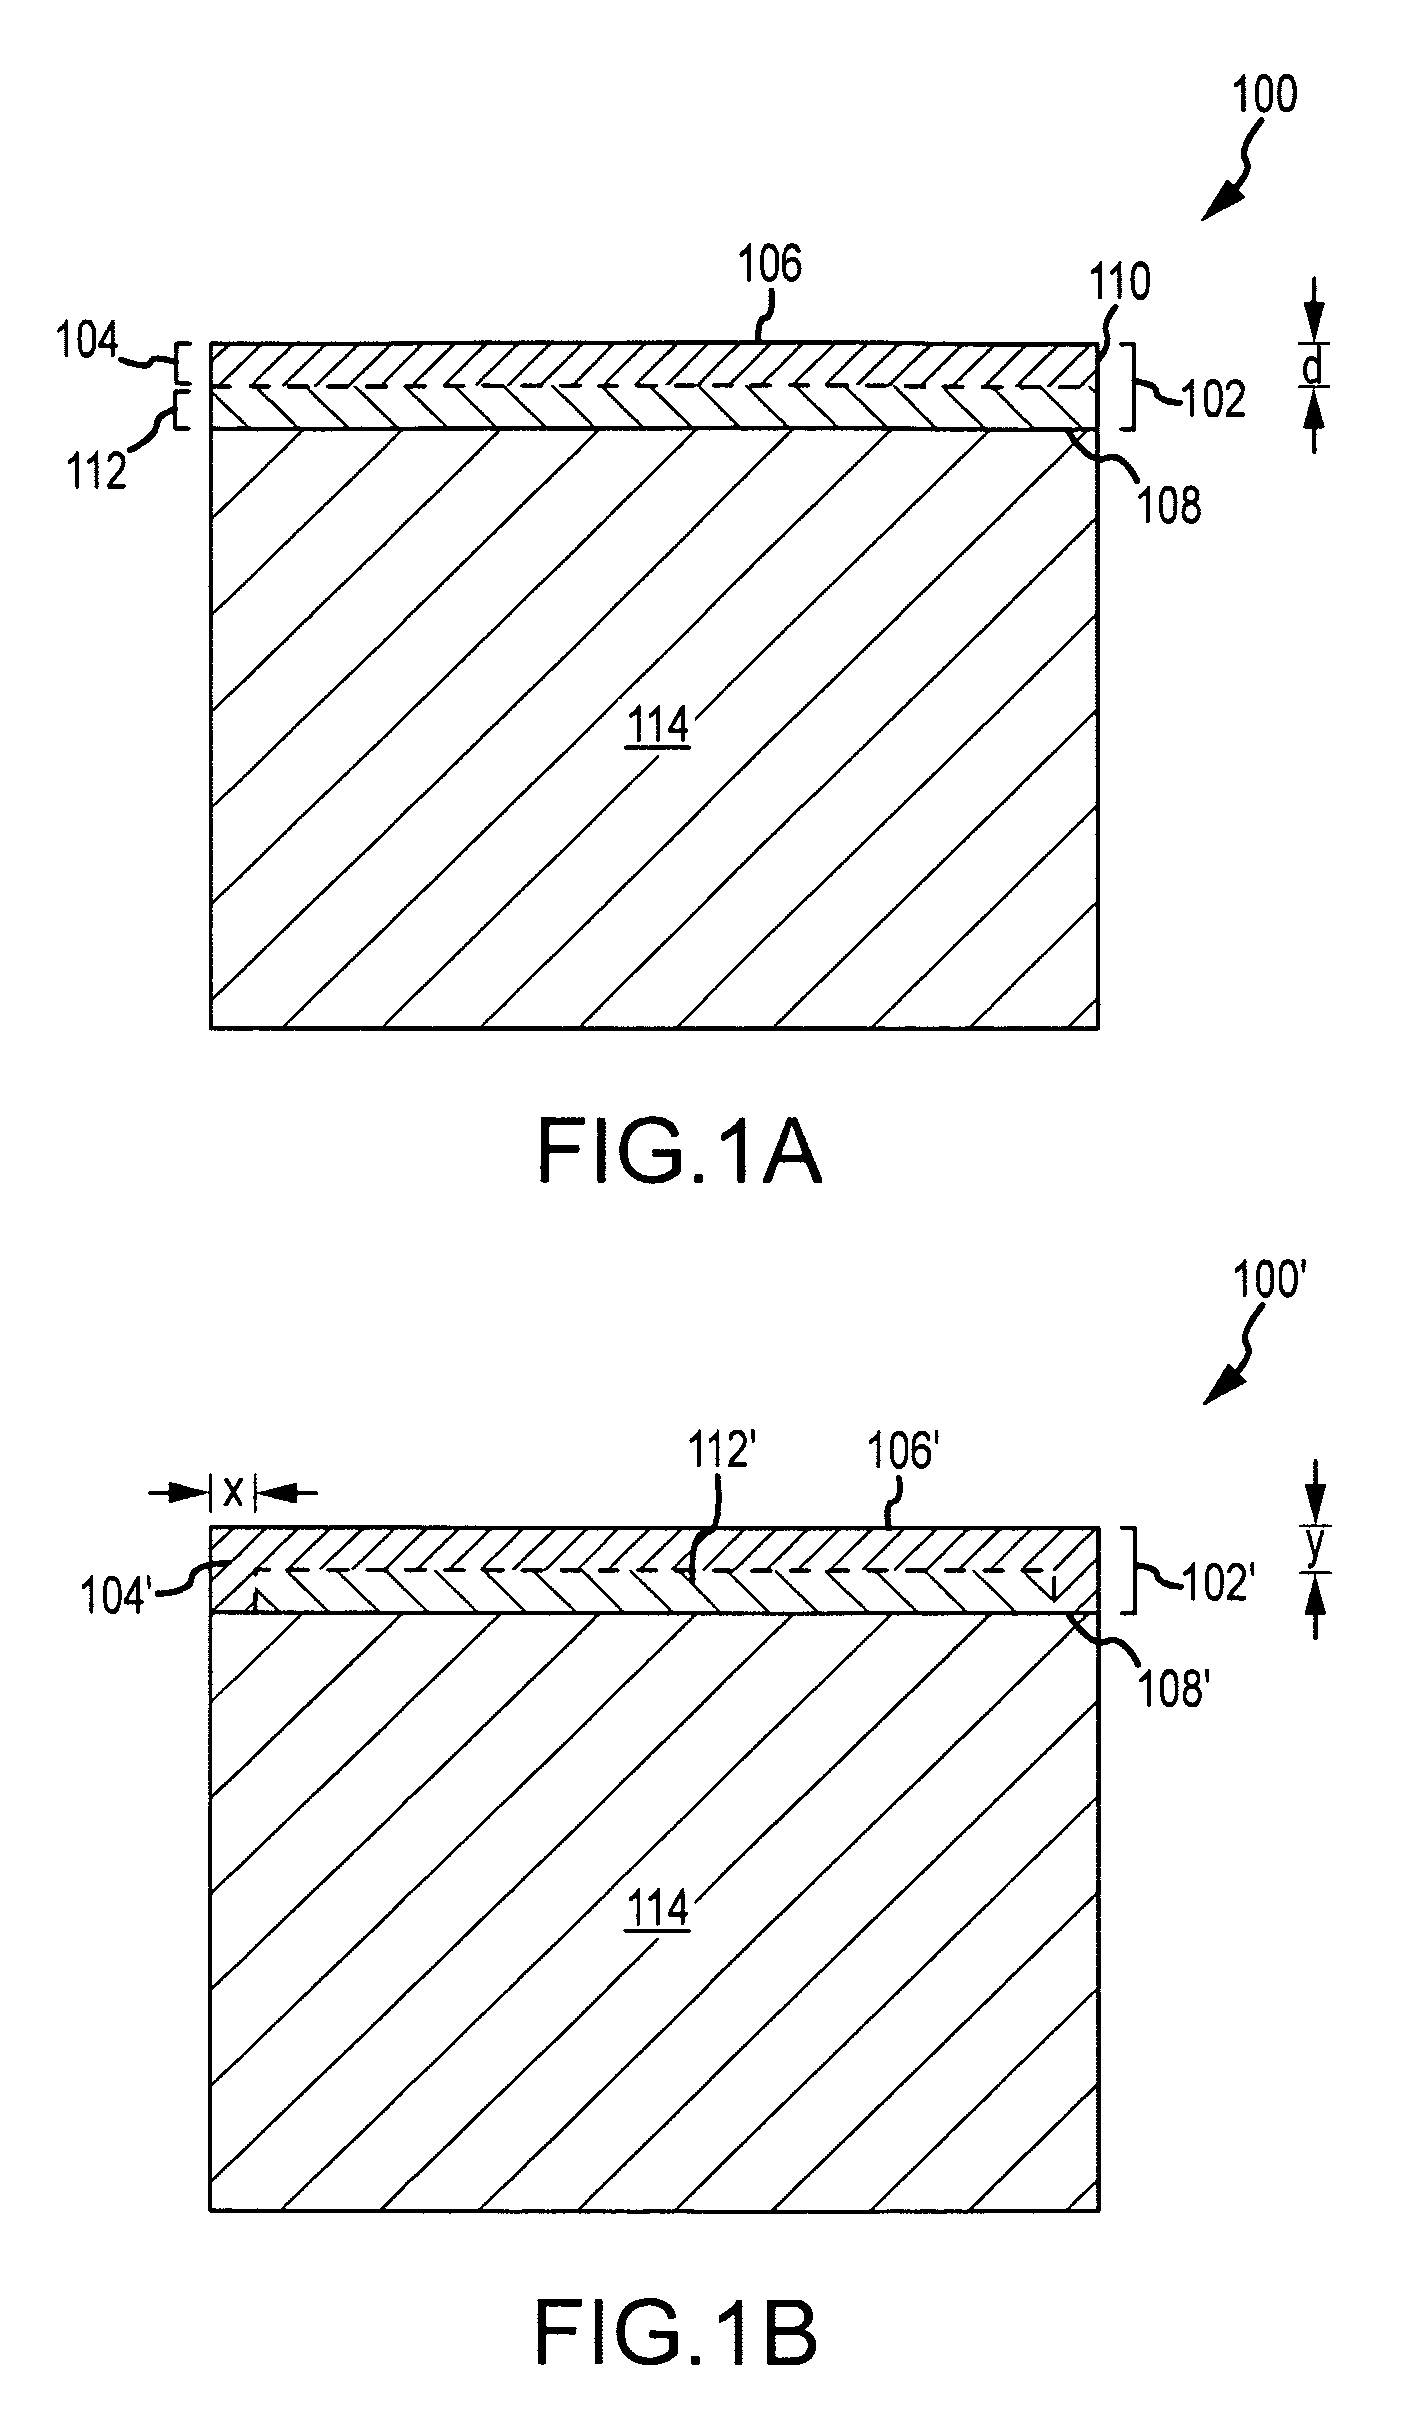 Polycrystalline diamond compact, methods of fabricating same, and applications therefor